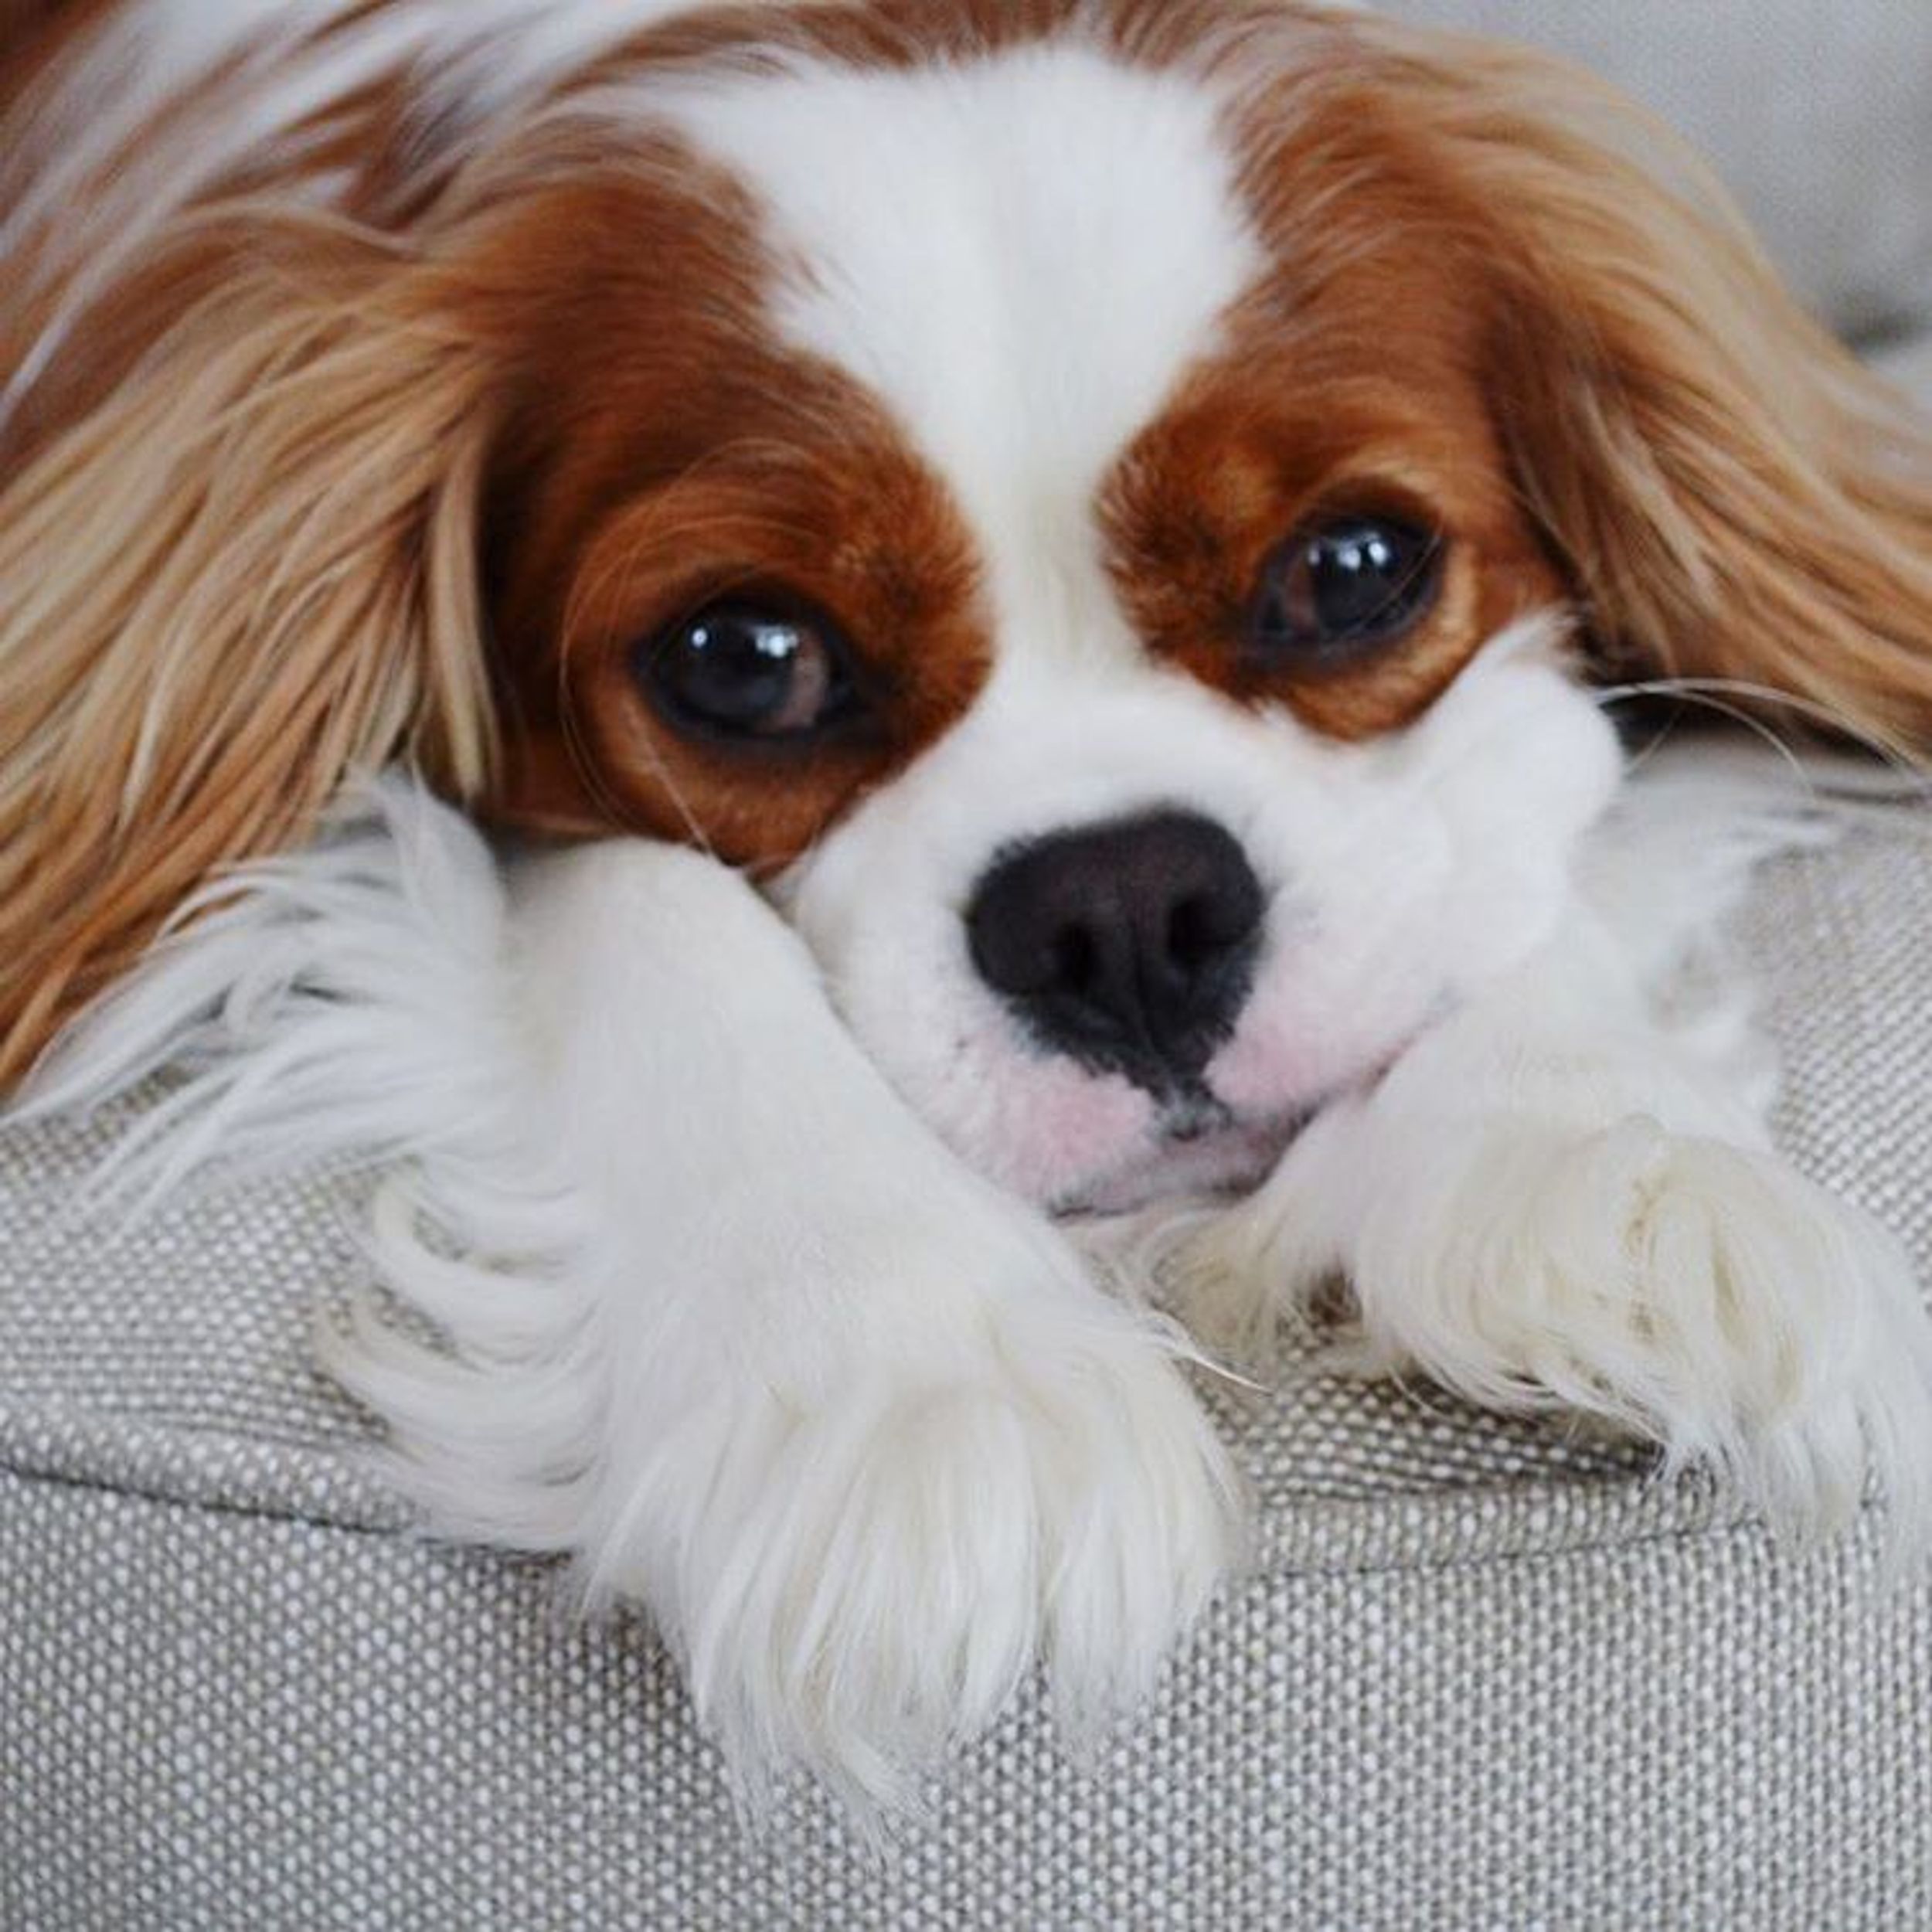 15 Pictures That Will Prove Cavalier King Charles Spaniels Are the Cutest Dogs